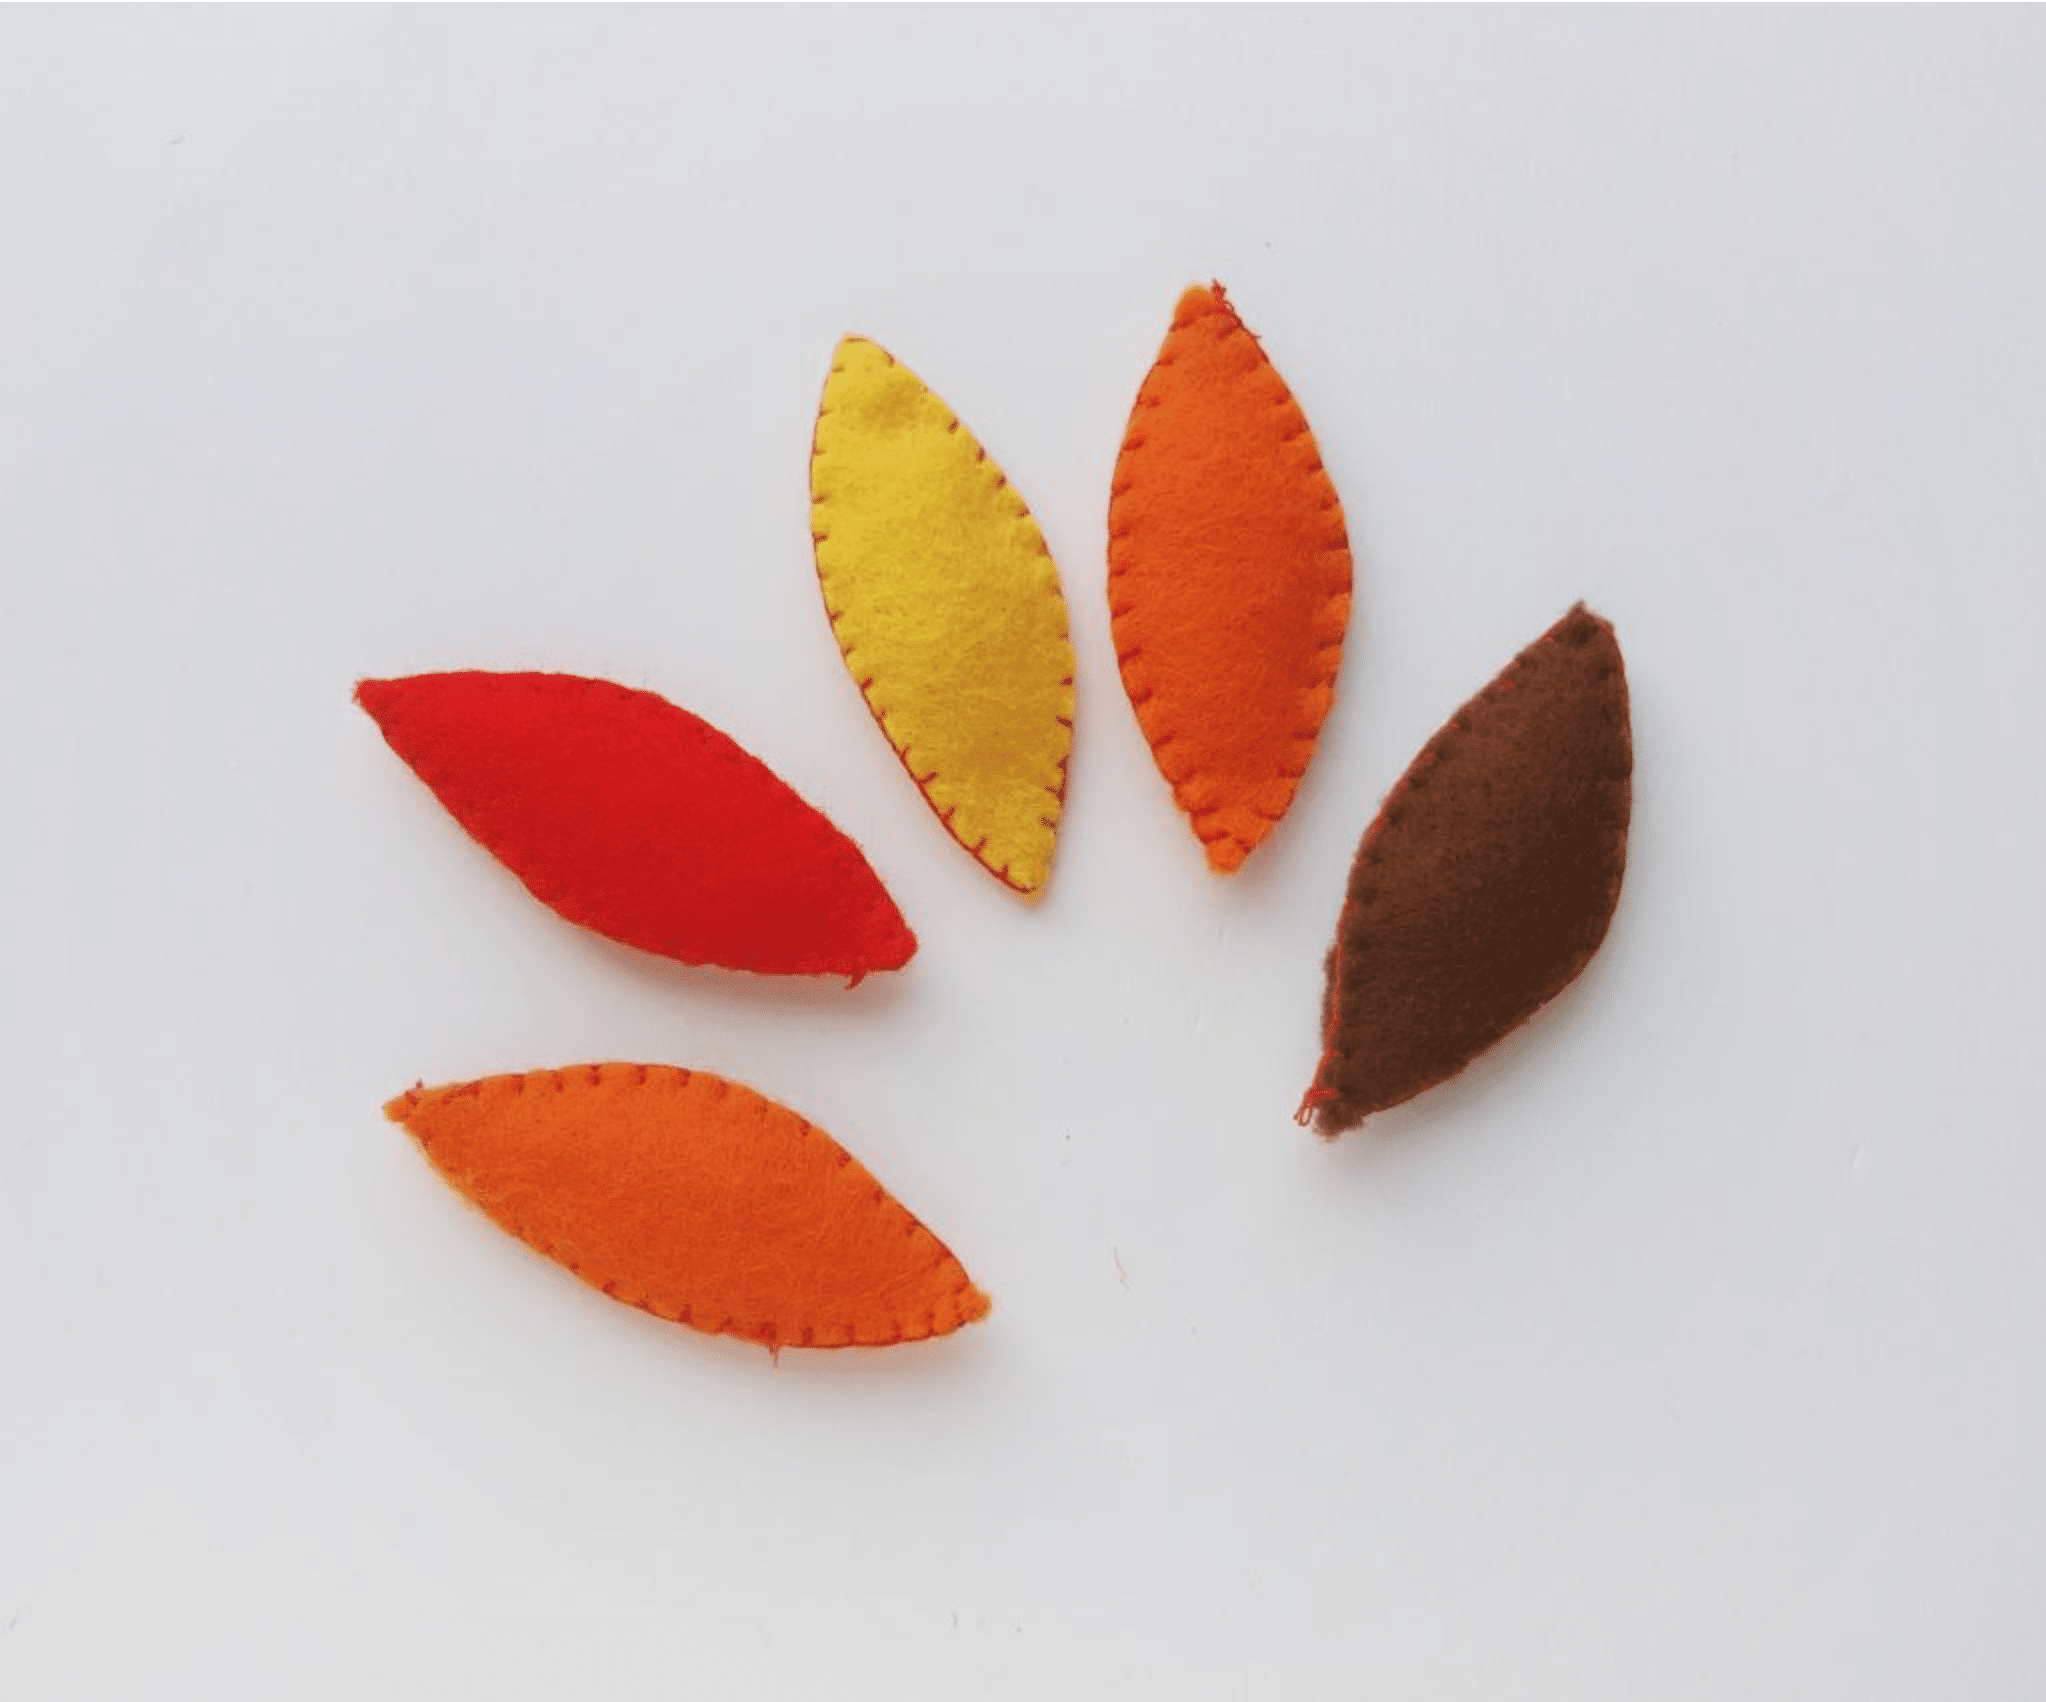 Five fabric leaves in red, yellow, orange, and brown are artfully arranged in a circular pattern on a white background, perfect for a festive turkey craft.